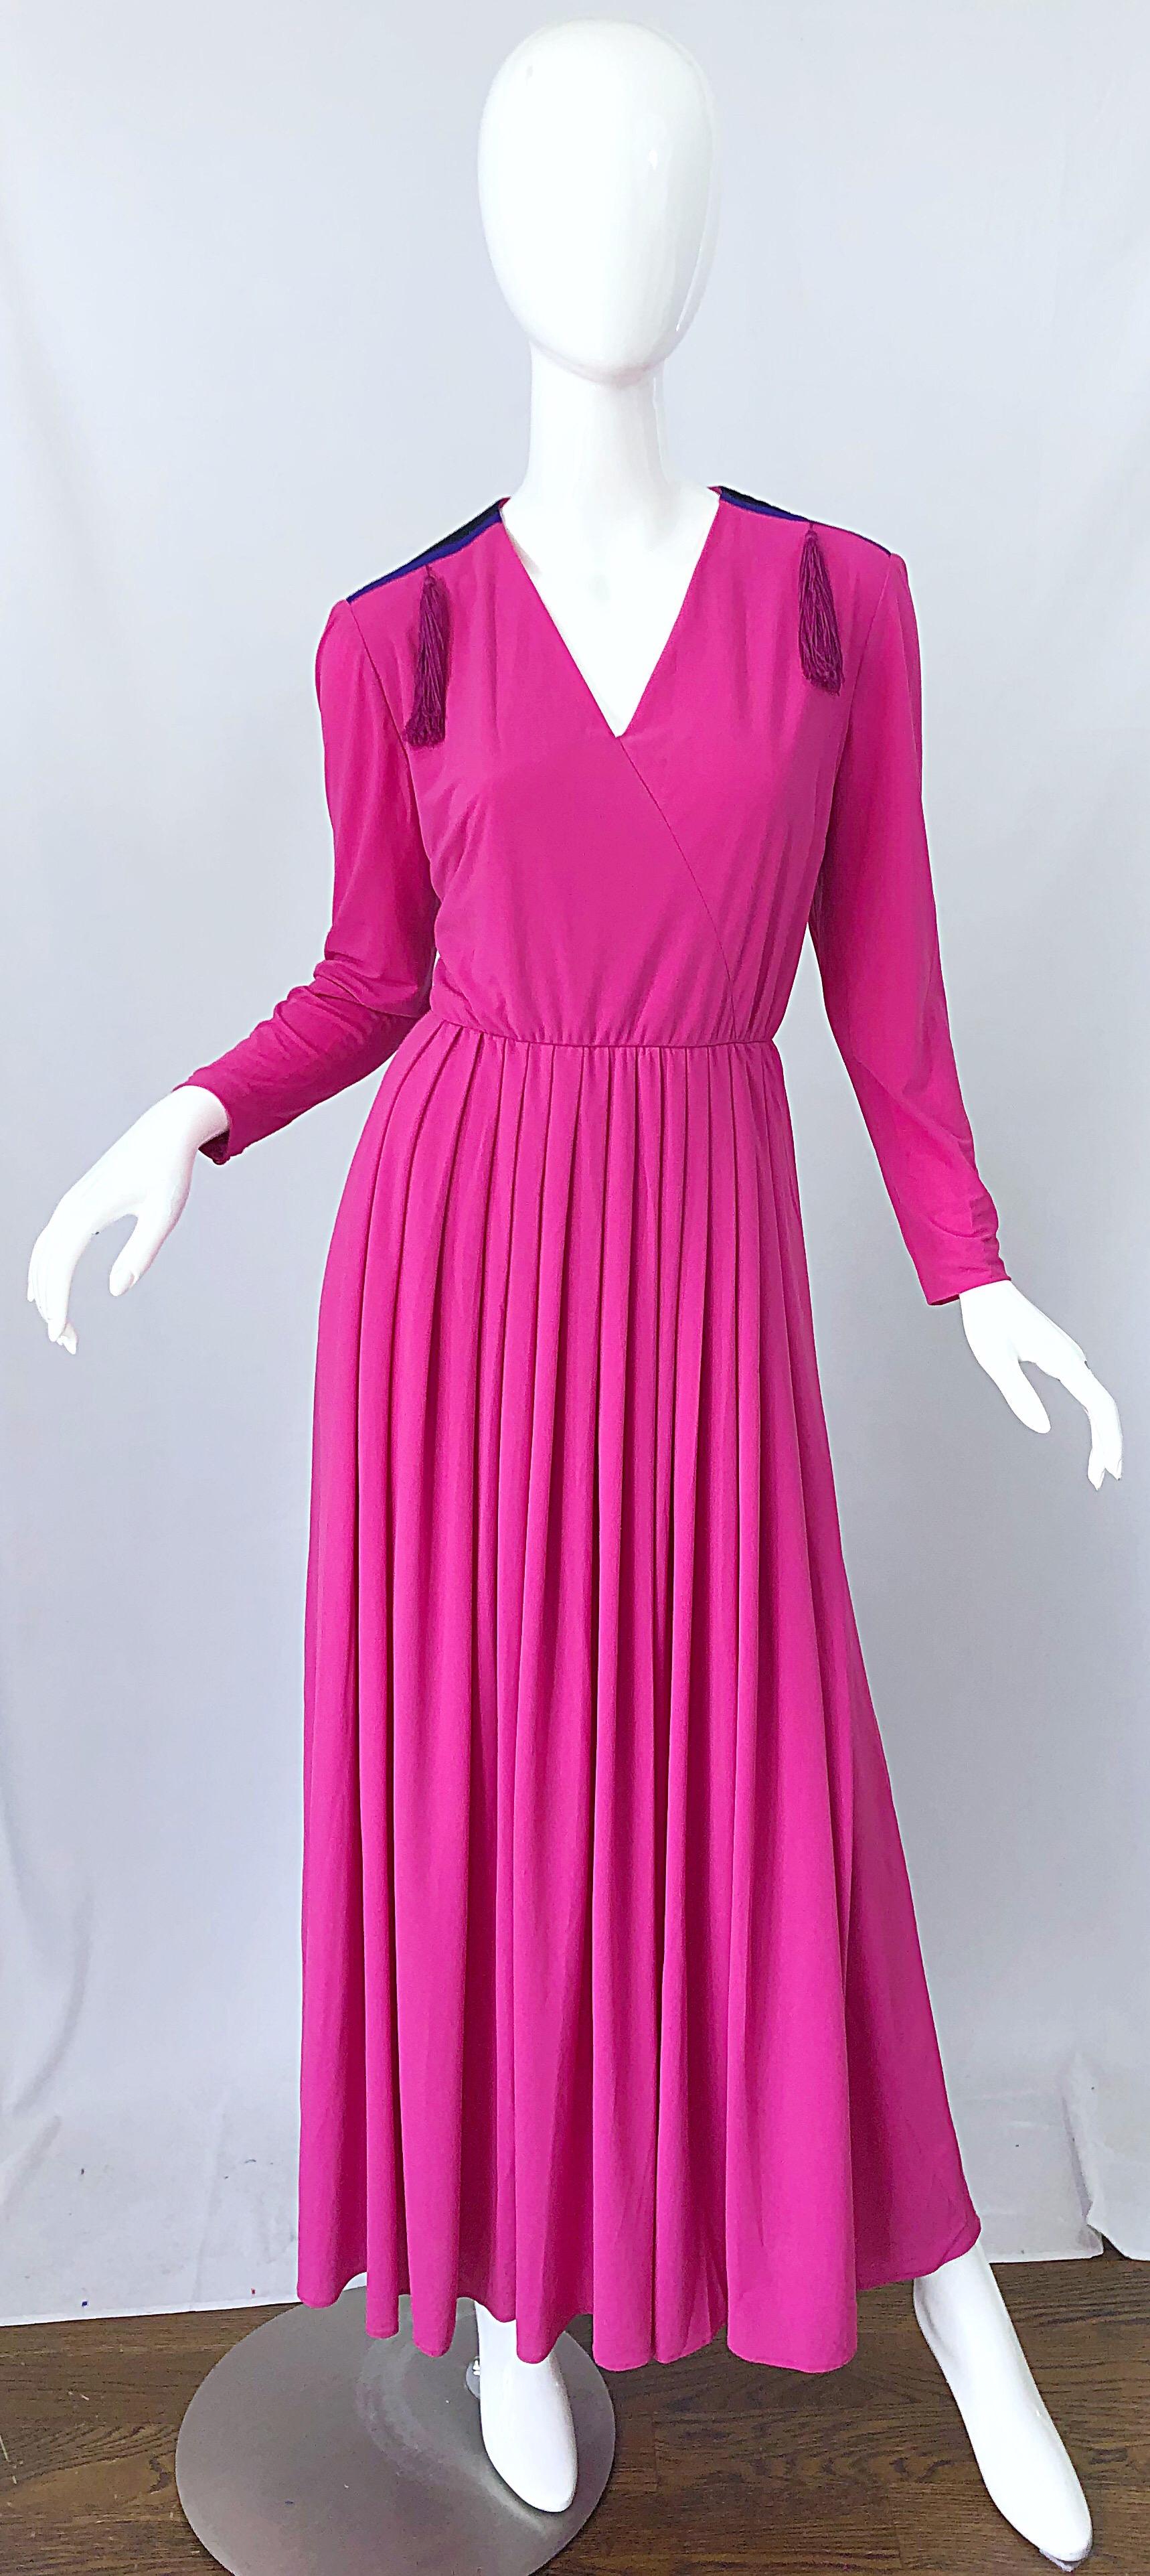 Beautiful 1970s dress by French design house FINK MODELL! Beautiful vibrant hot pink color with purple and black stripes on the shoulders. Tassels at each shoulder add just the right amount of pizazz. Soft rayon jersey offers lots of stretch.